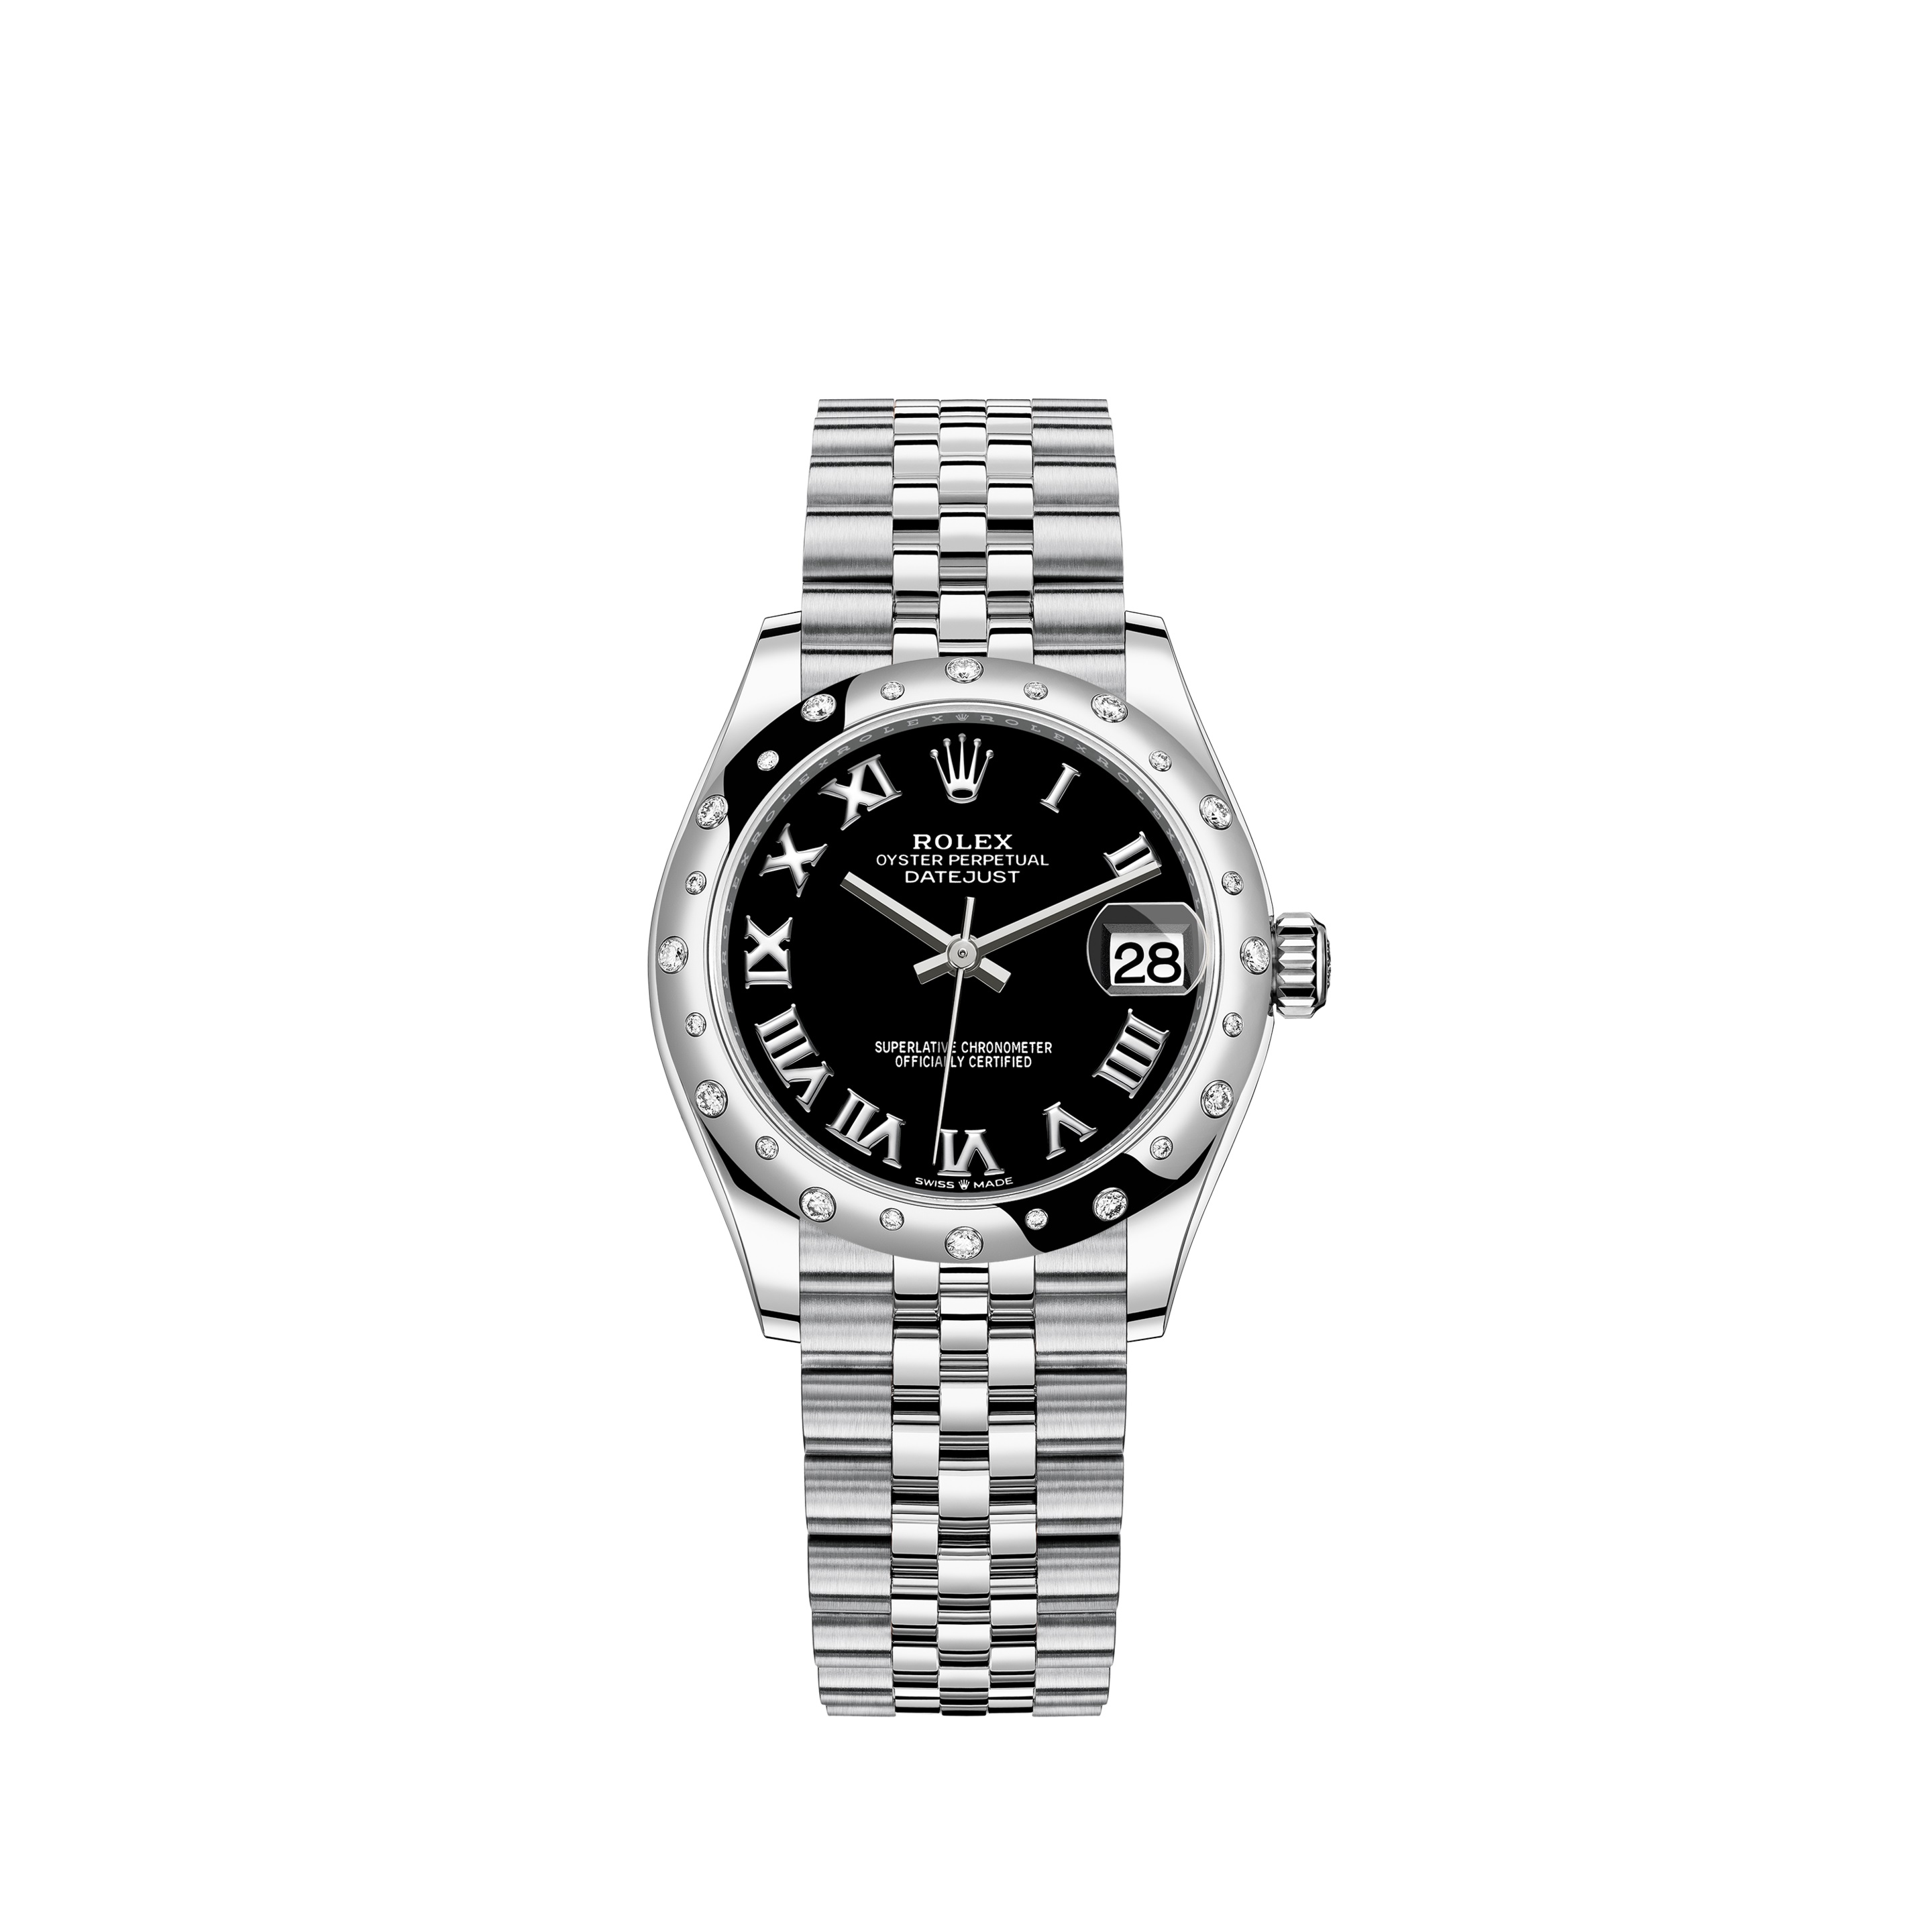 Datejust 31 278344RBR White Gold & Stainless Steel Watch (Bright Black)